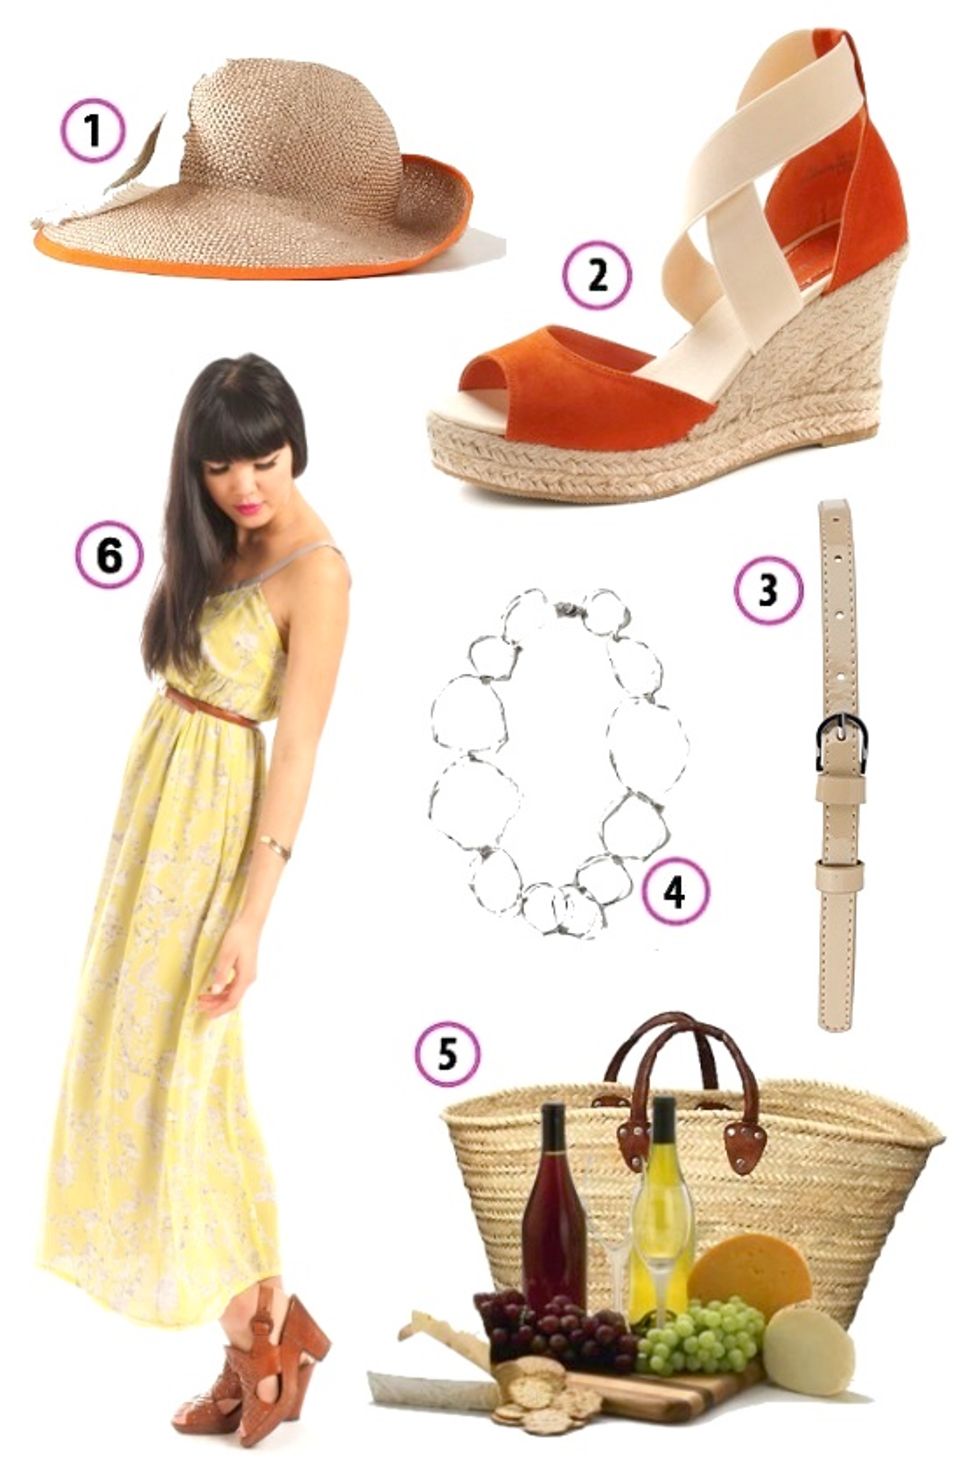 Look of the Week: Picnic in the Park, SF Symphony at the 74th Annual Stern Grove Festival